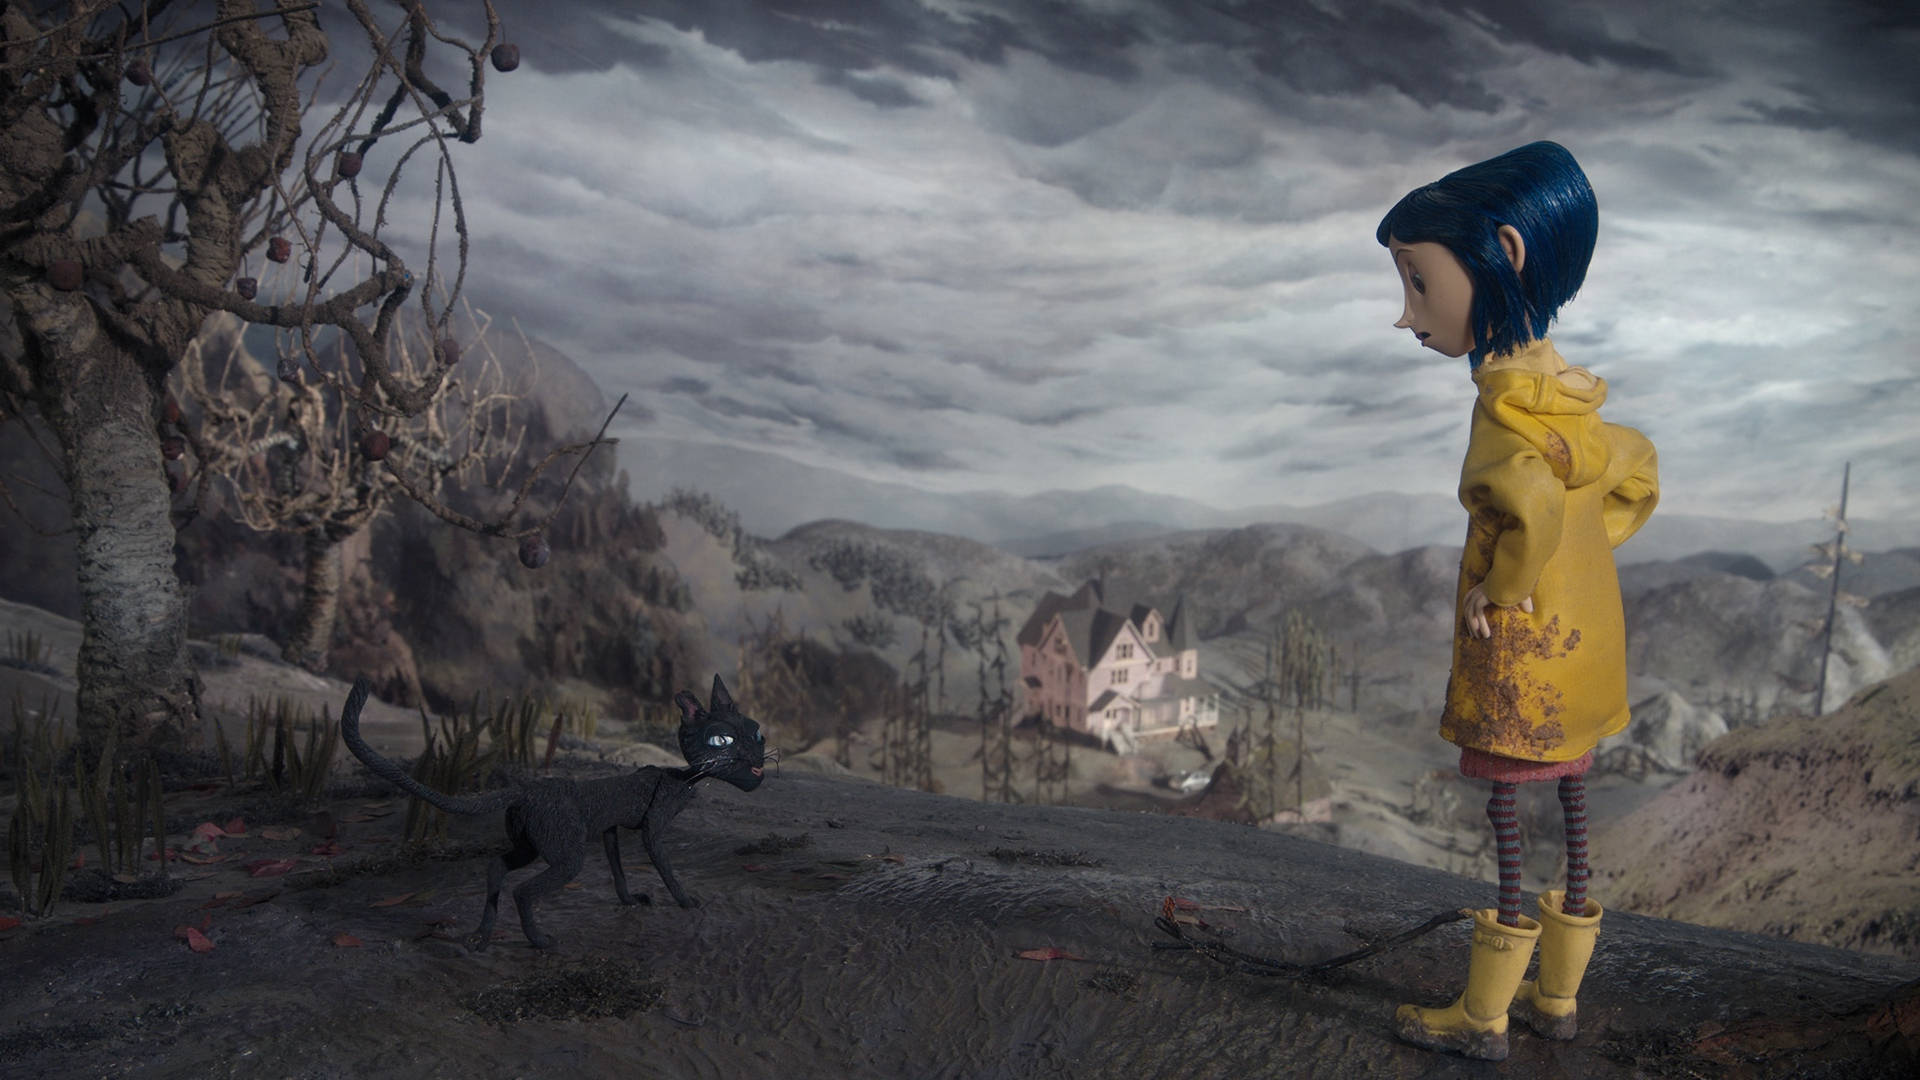 1920X1080 Coraline Wallpaper and Background